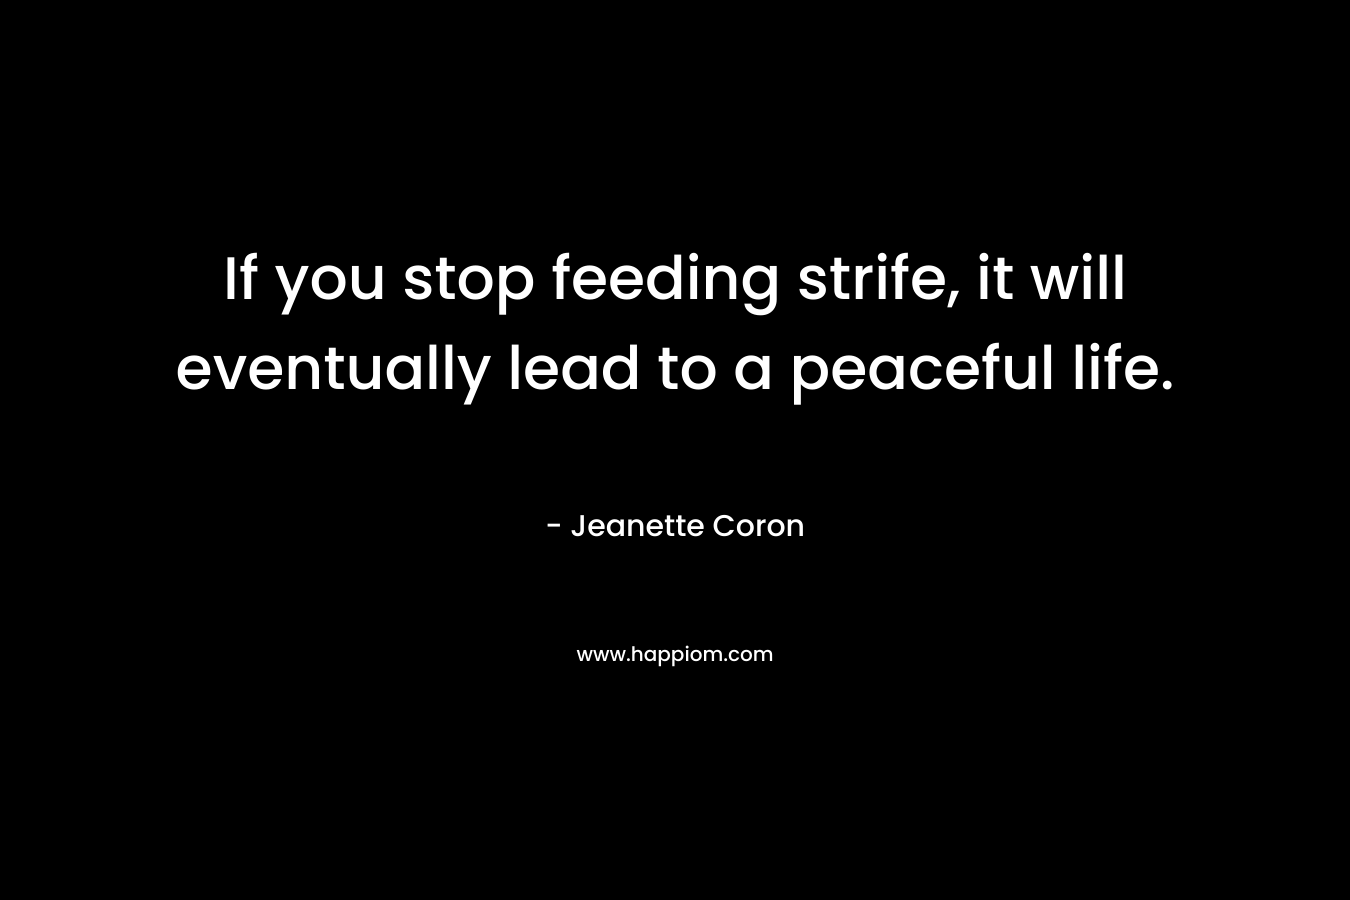 If you stop feeding strife, it will eventually lead to a peaceful life. – Jeanette Coron